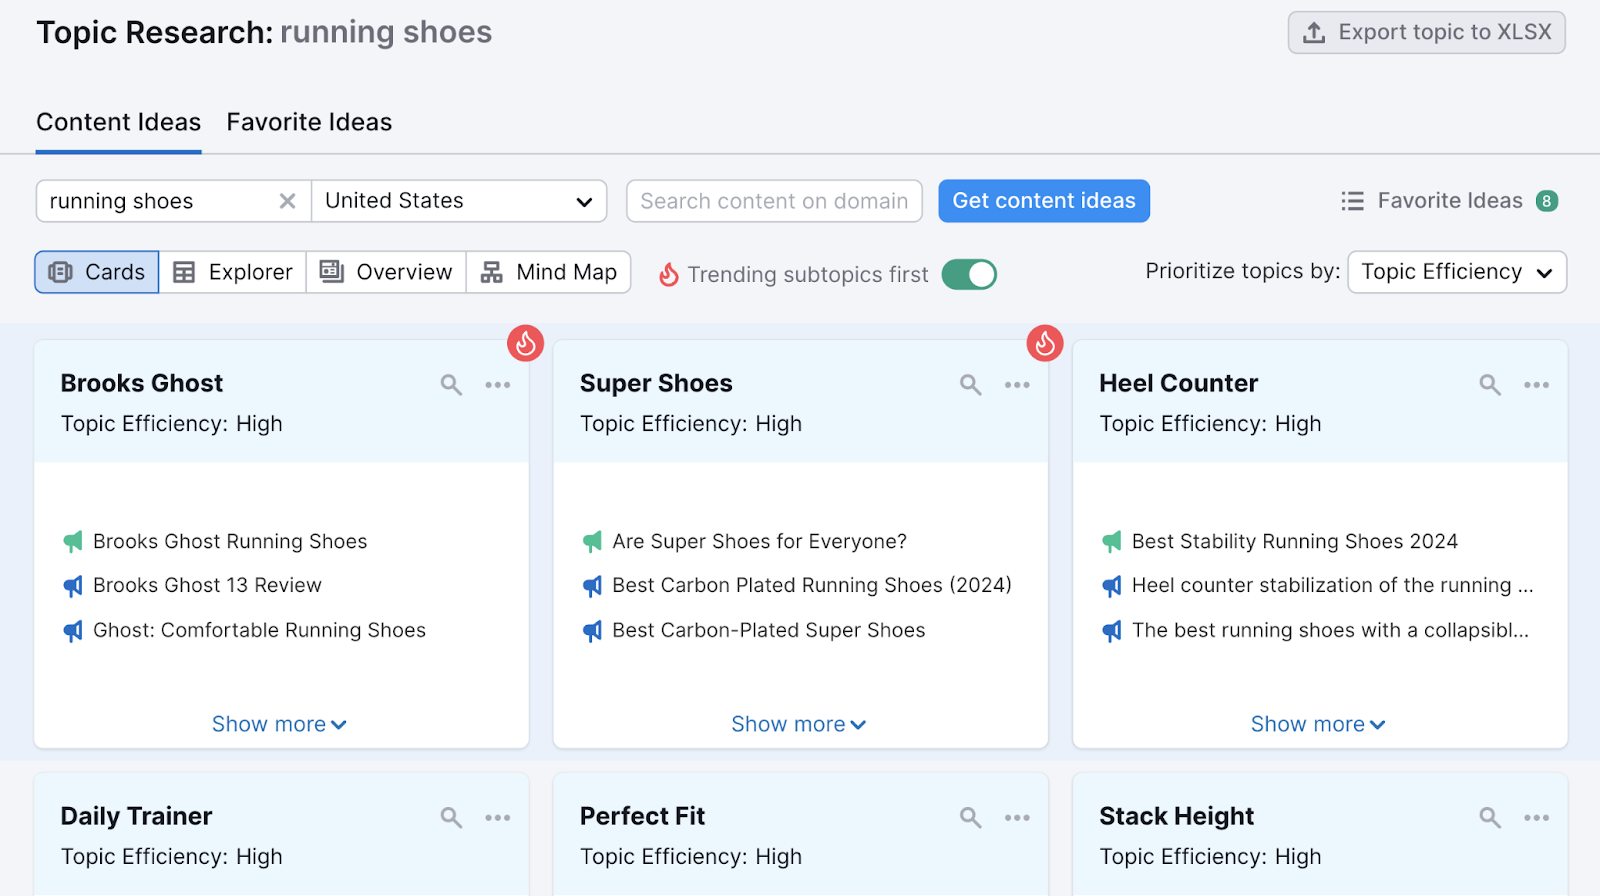 "Content Ideas" dashboard for "running shoes" in Topic Research tool